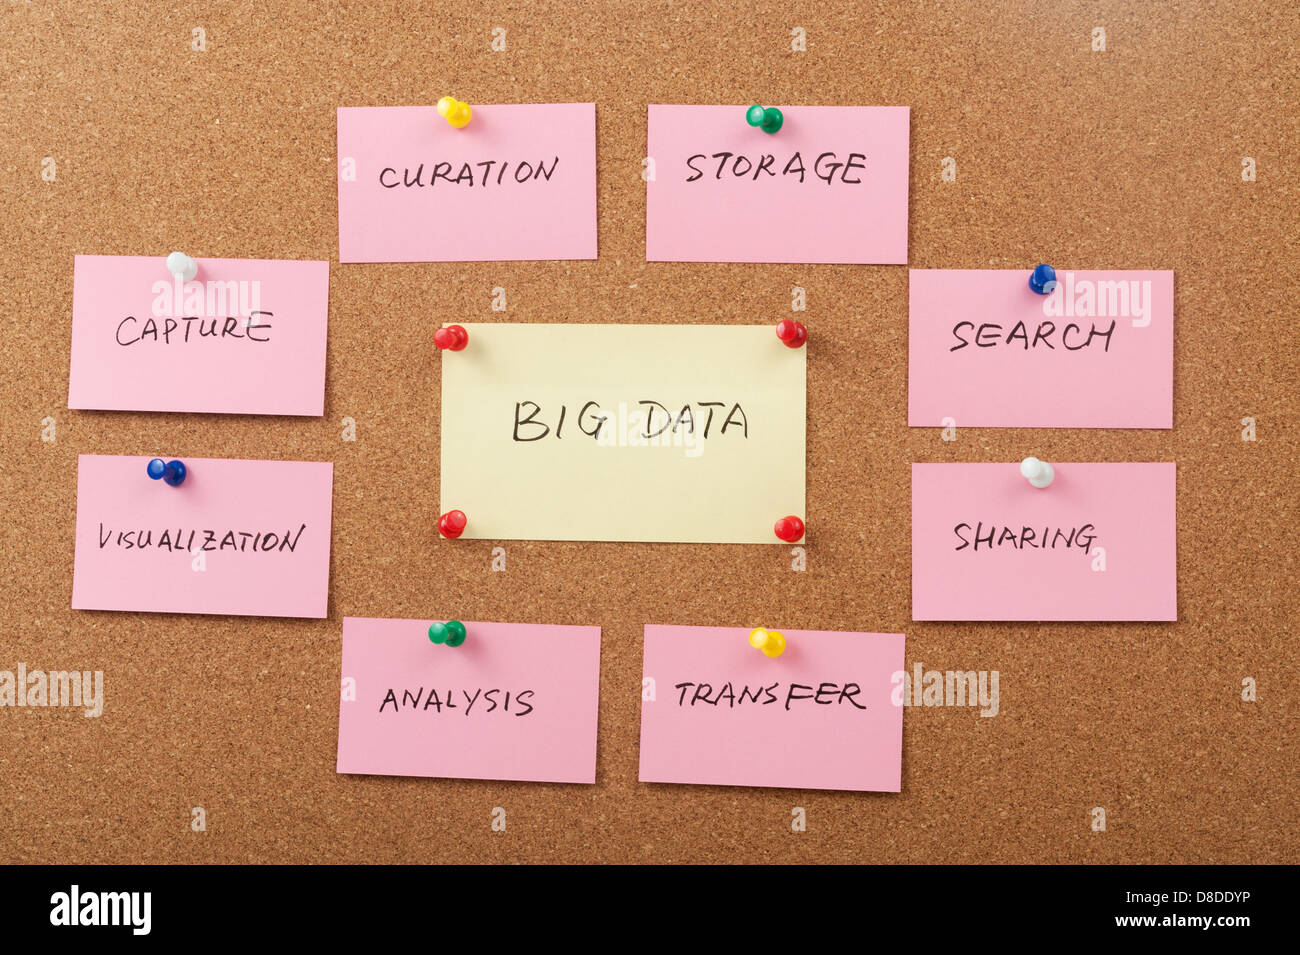 Big data concept words pinned on cork board Stock Photo